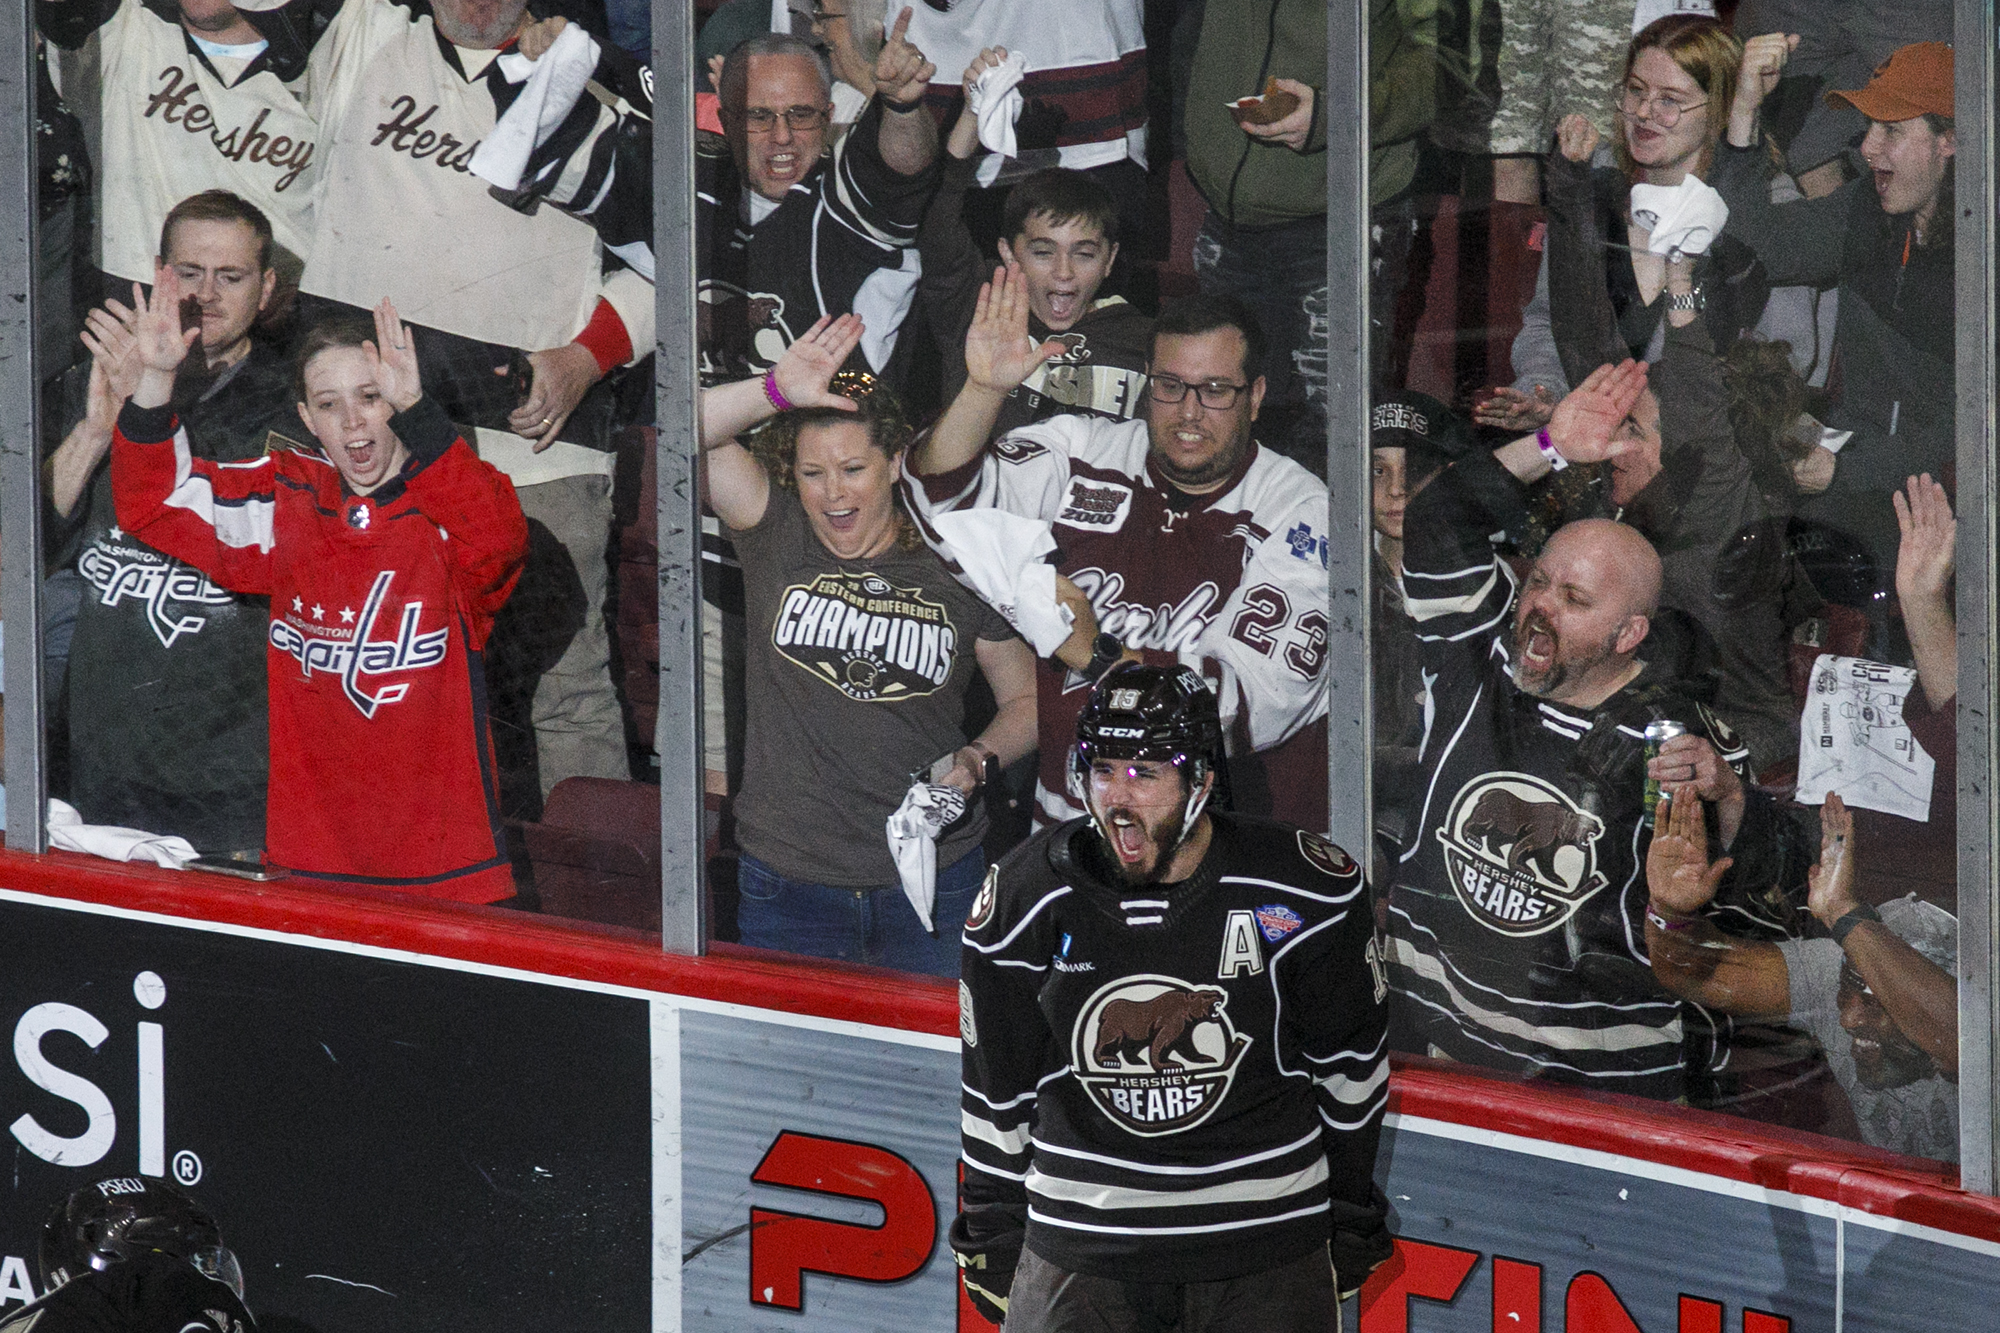 On June 7th, these signed, game worn Hershey Bears jerseys became